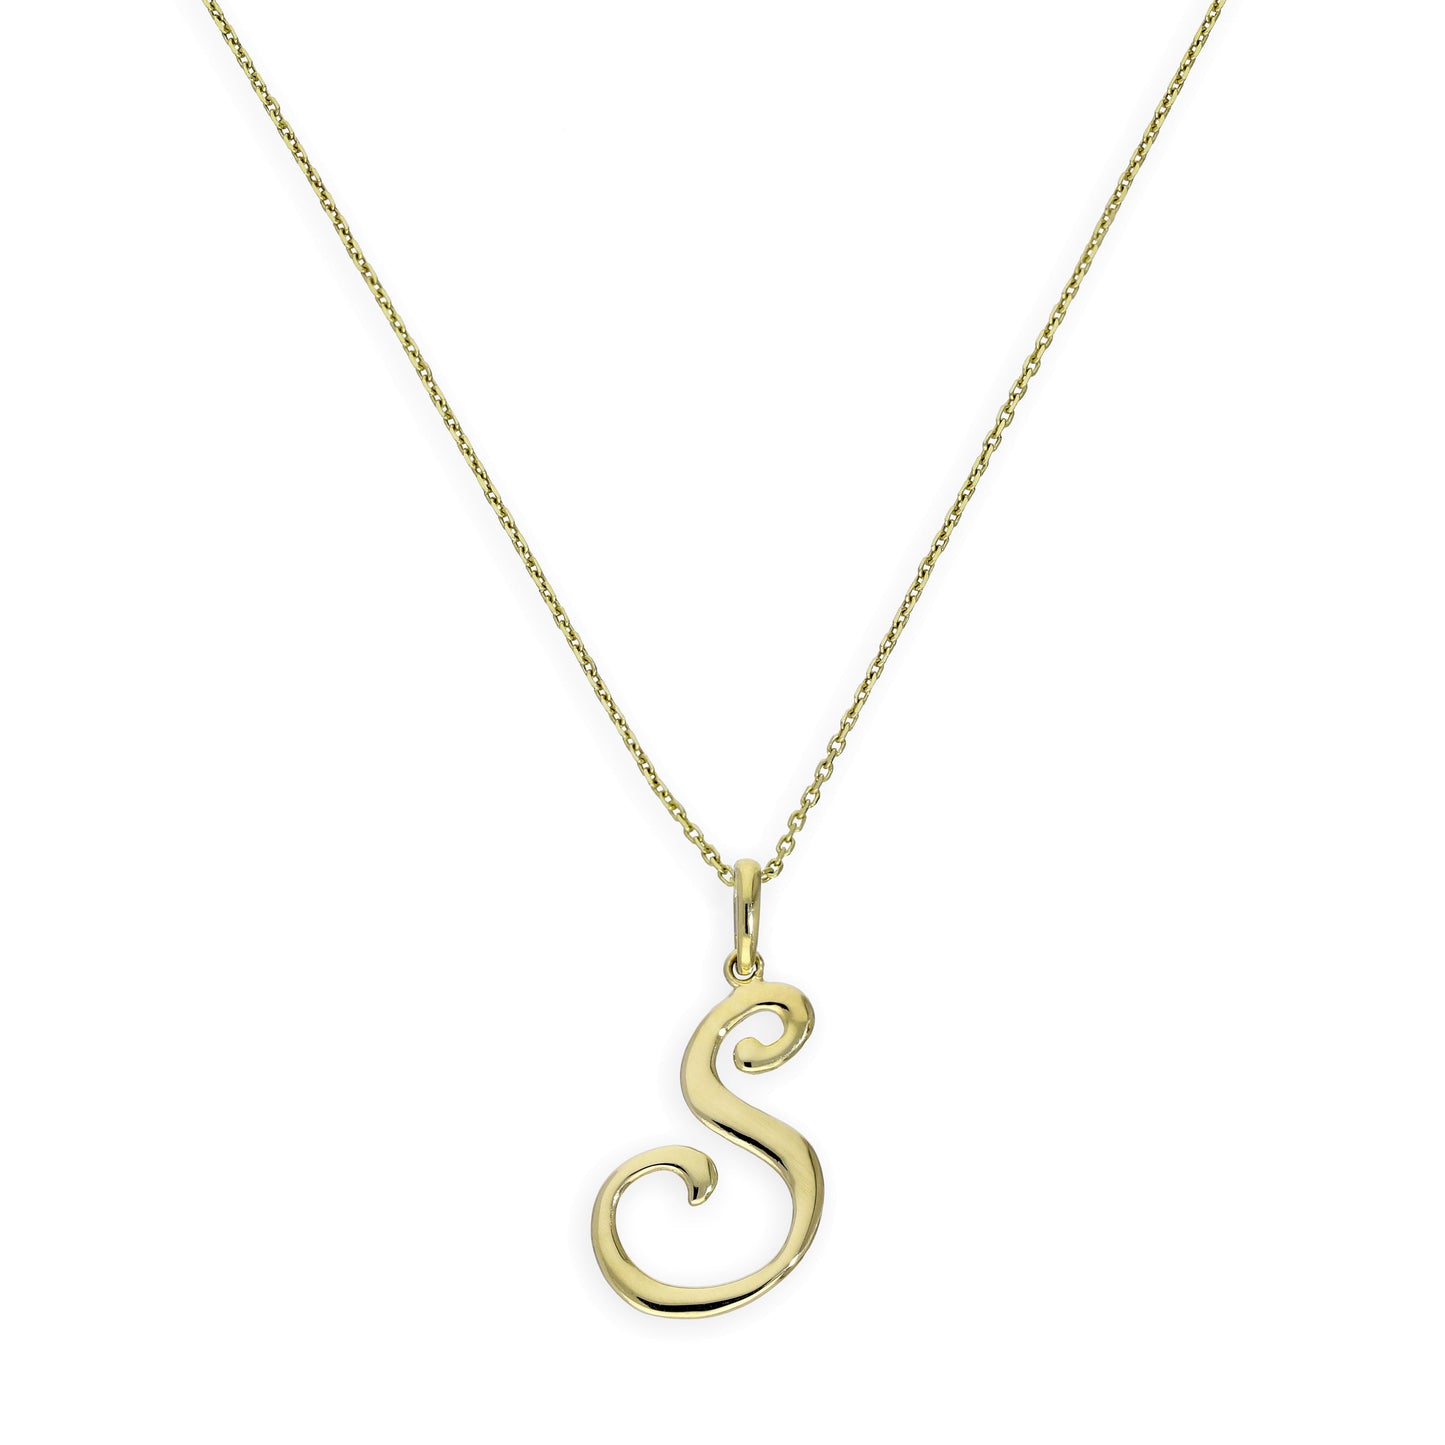 9ct Gold Fancy Calligraphy Script Letter S Pendant Necklace 16 - 20 Inches